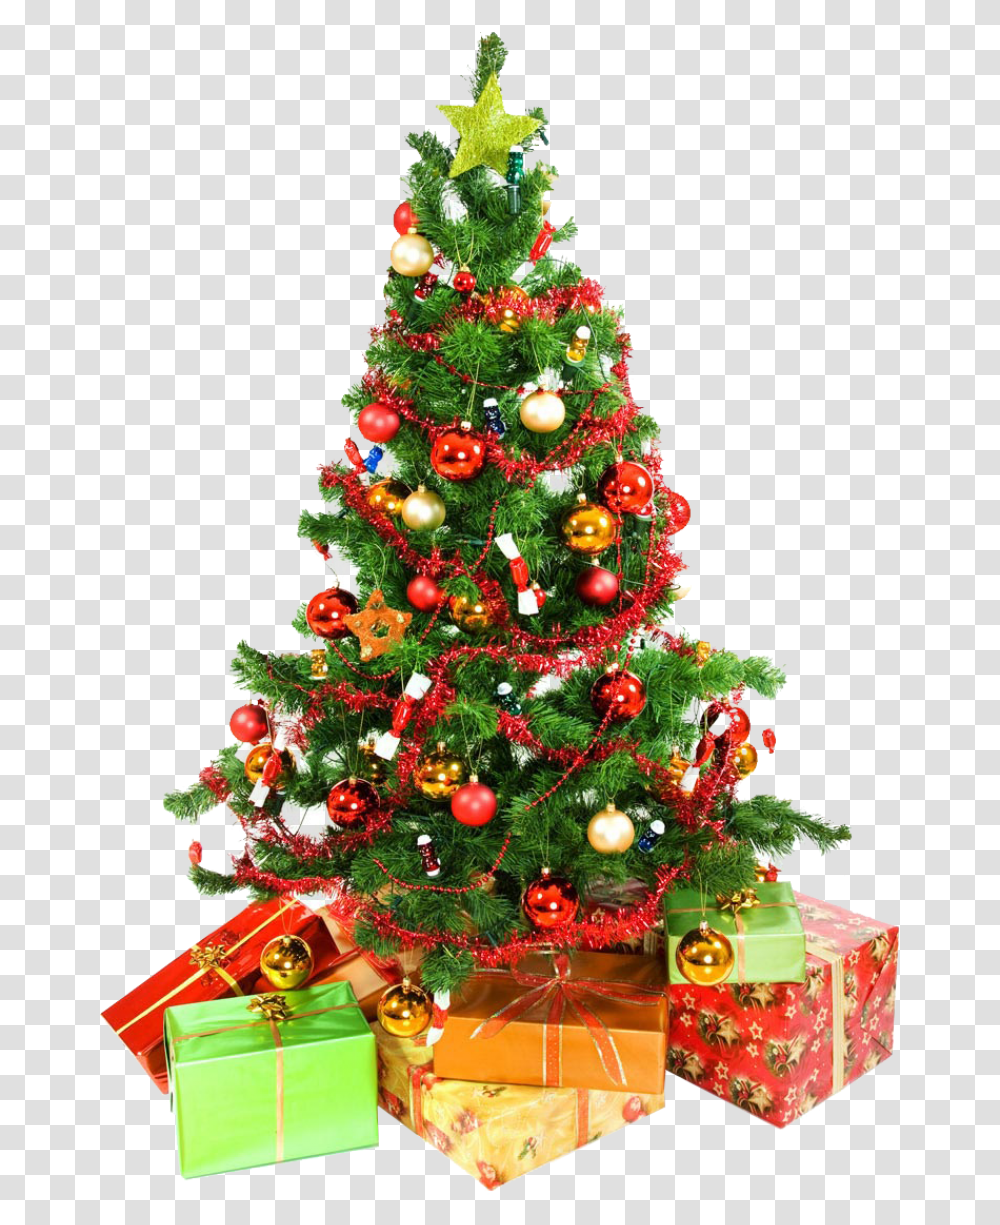 Christmas Tree Presents Underneath Image High Resolution Christmas Images Download, Ornament, Plant Transparent Png